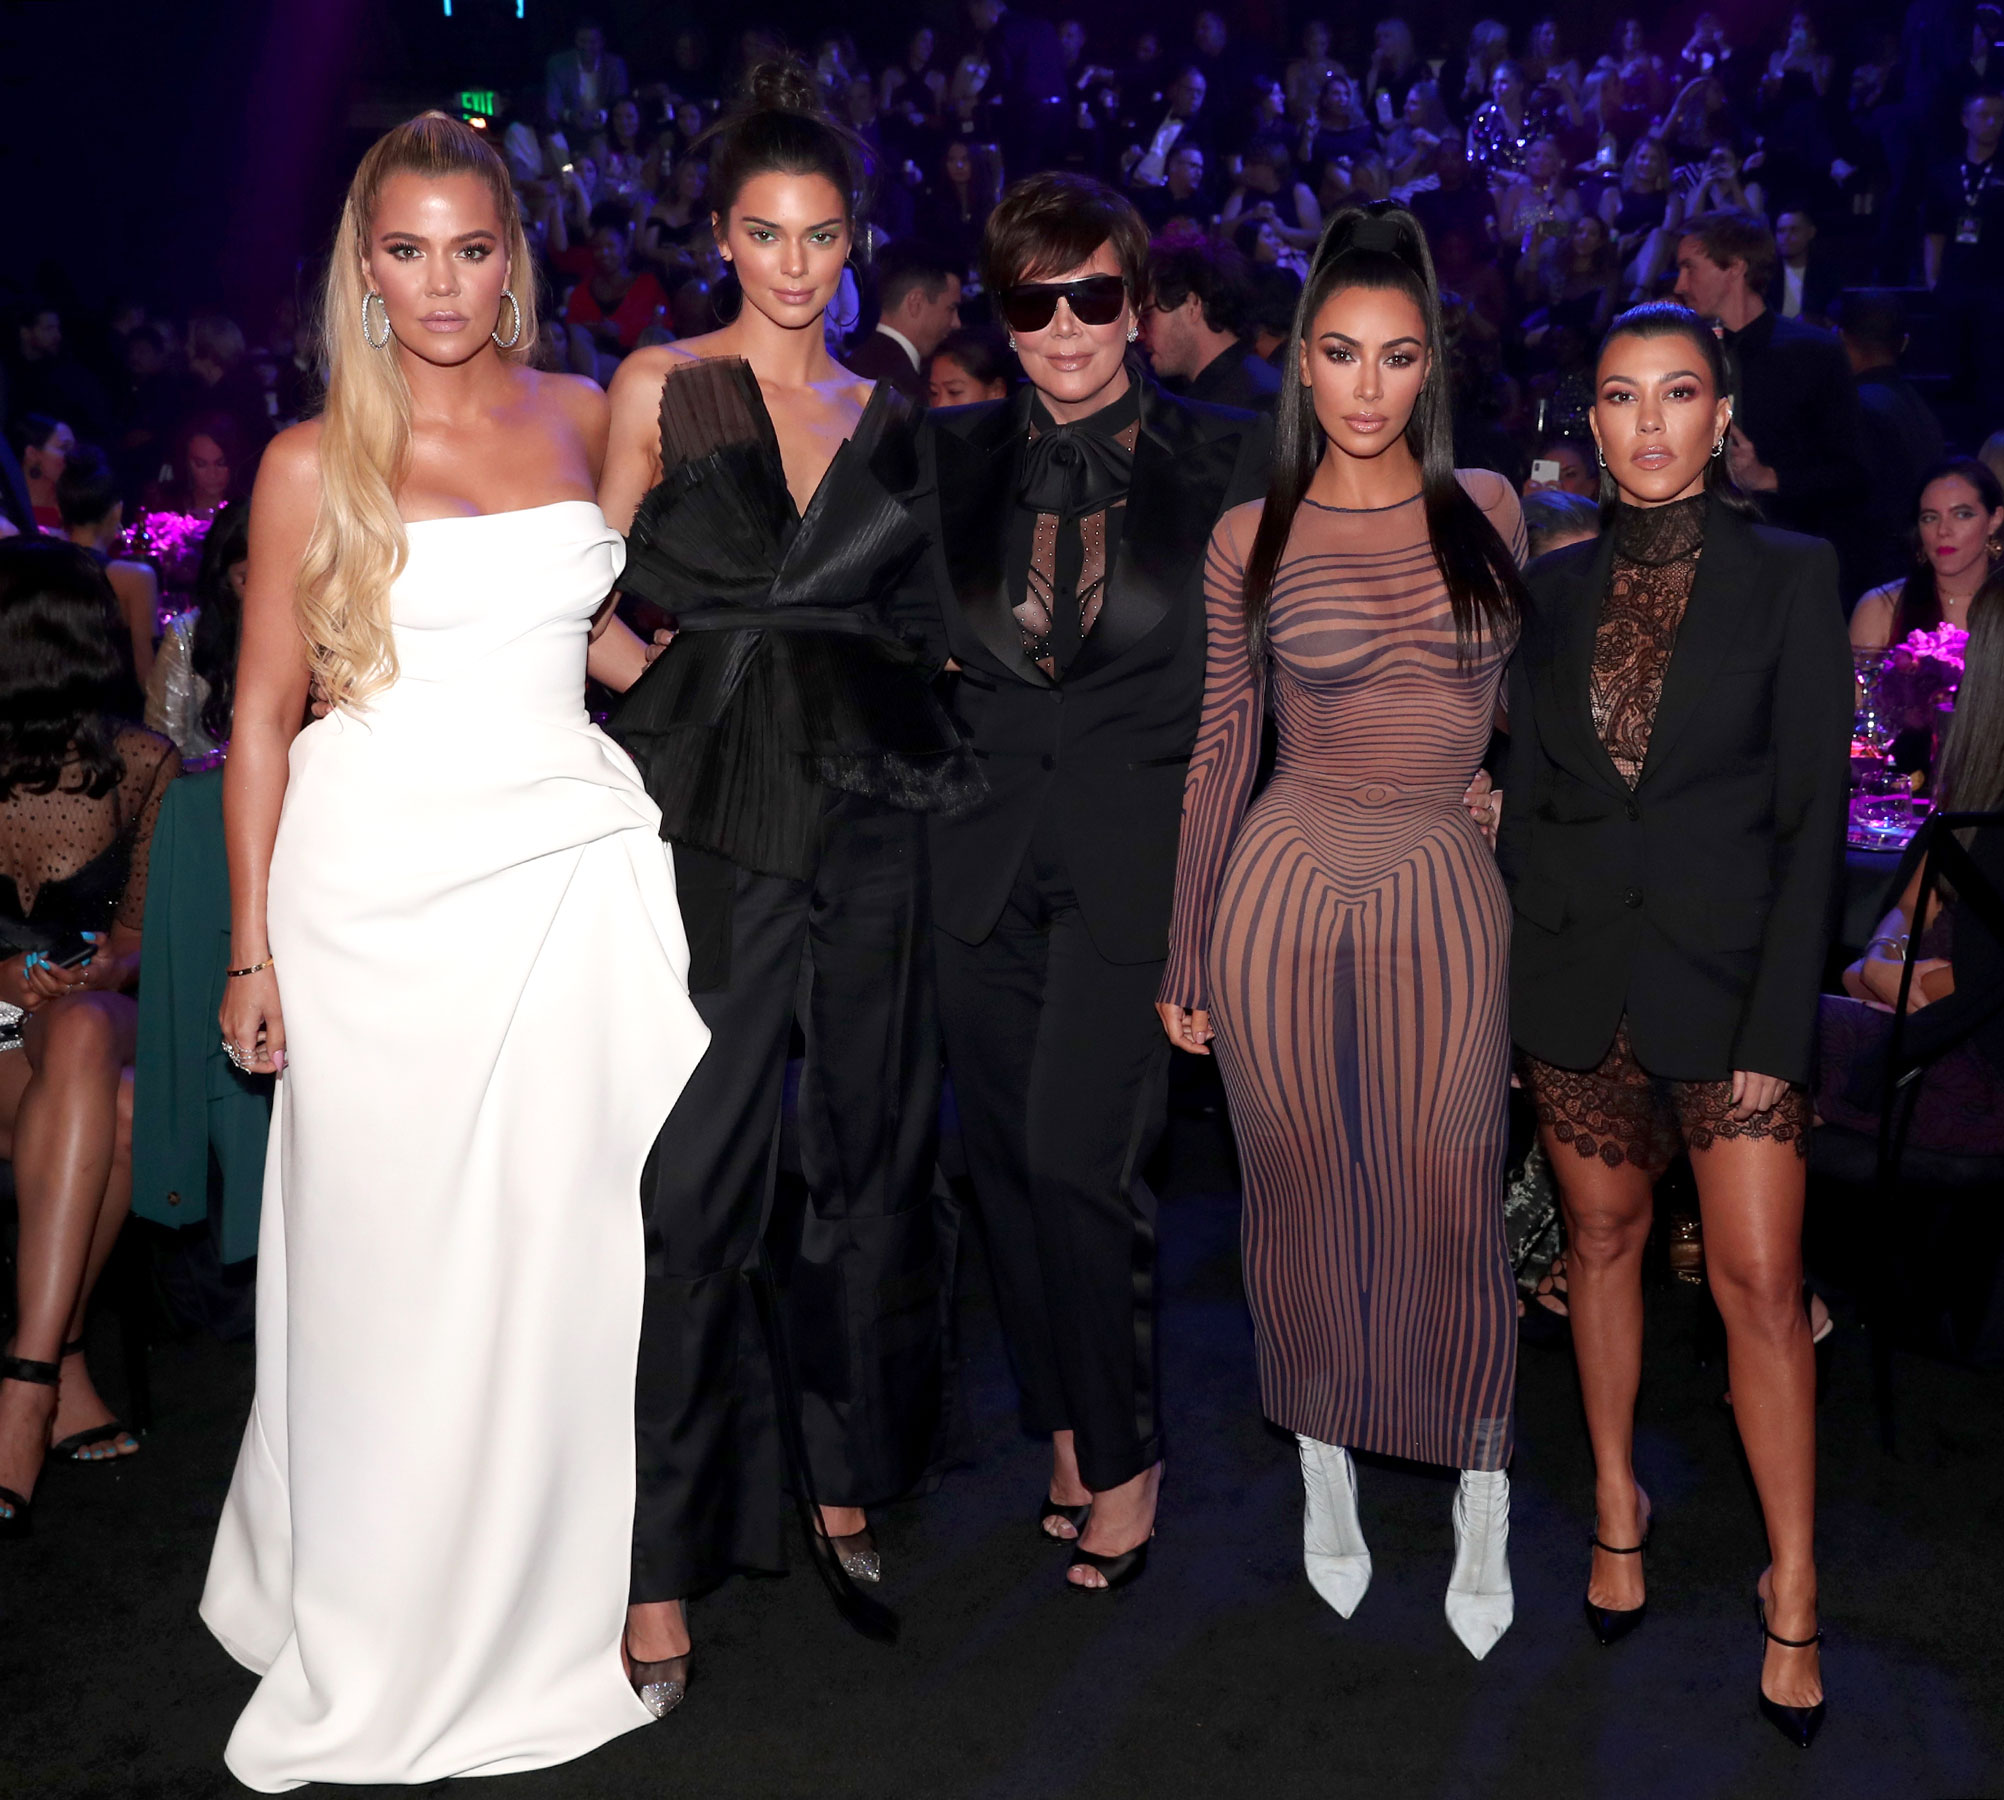 Kim Kardashian Says Our Hearts Are Broken as She Accepts Peoples Choice Award with Family